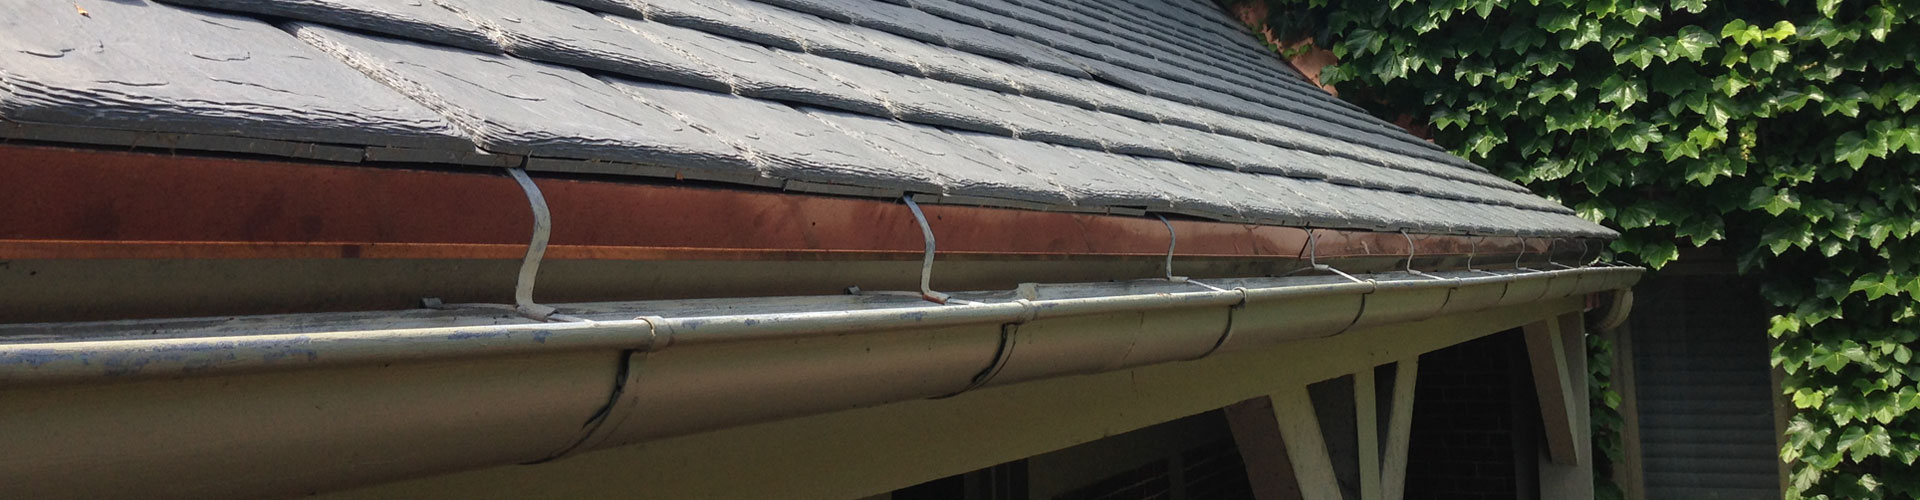 Gutter on the edge of a roof